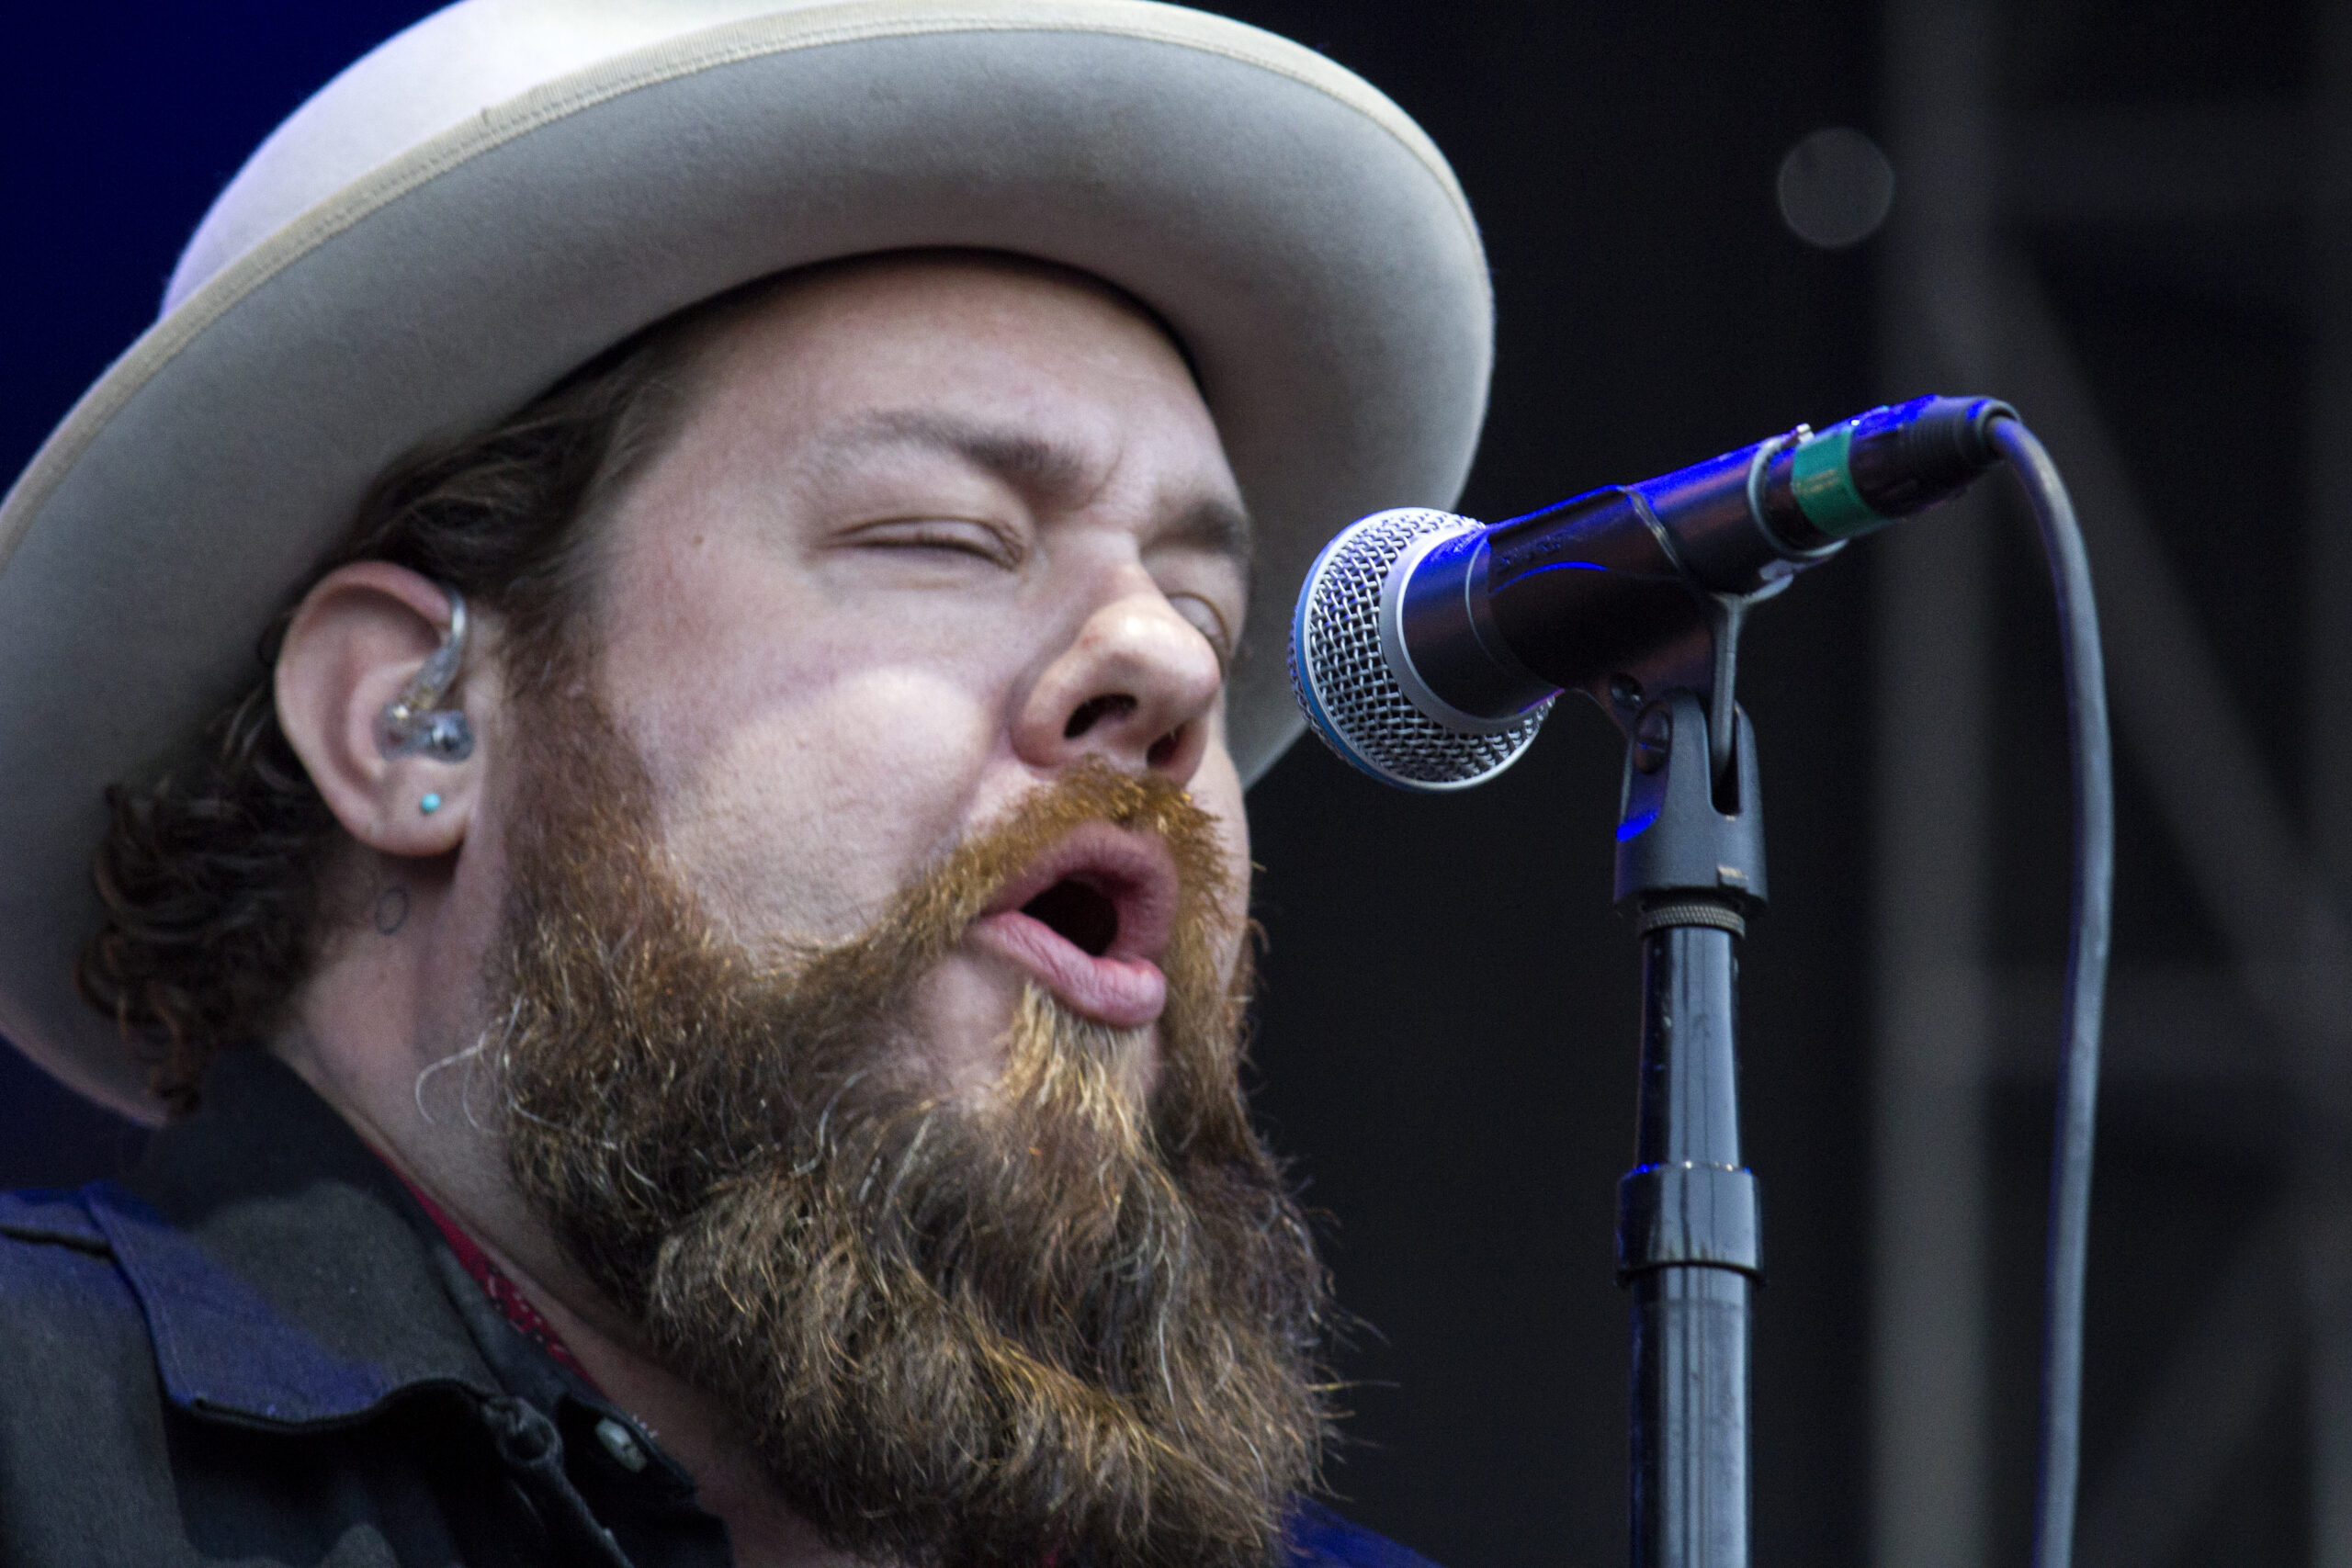 Nathaniel Rateliff & The Night Sweats at LouFest Music Festival 2017. Photo by: Matthew McGuire